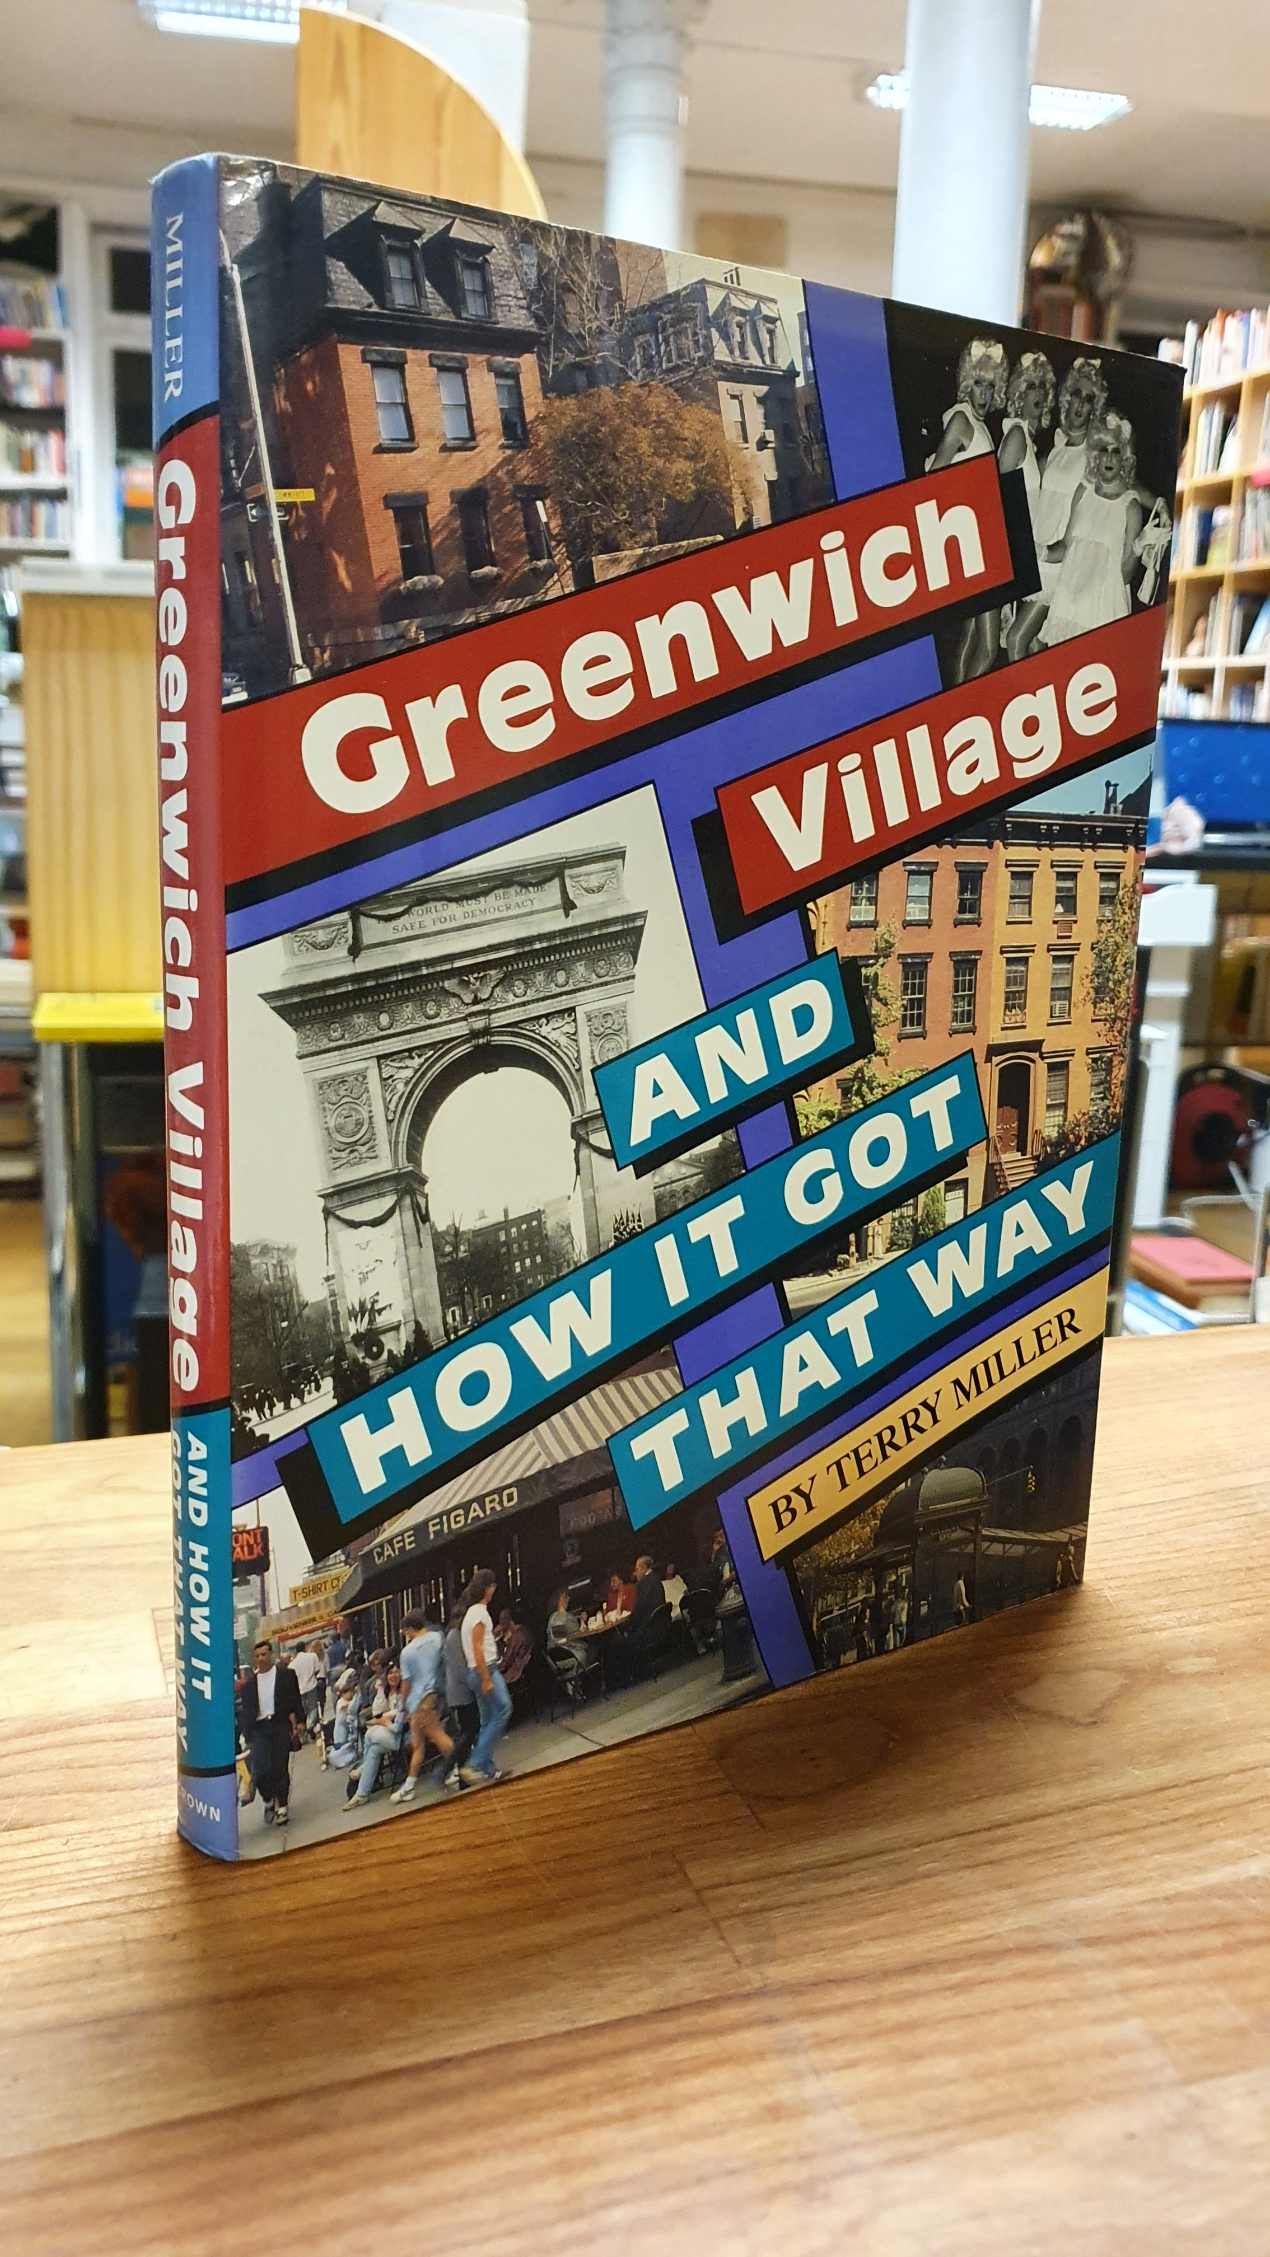 Greenwich Village And How It Got That Way,